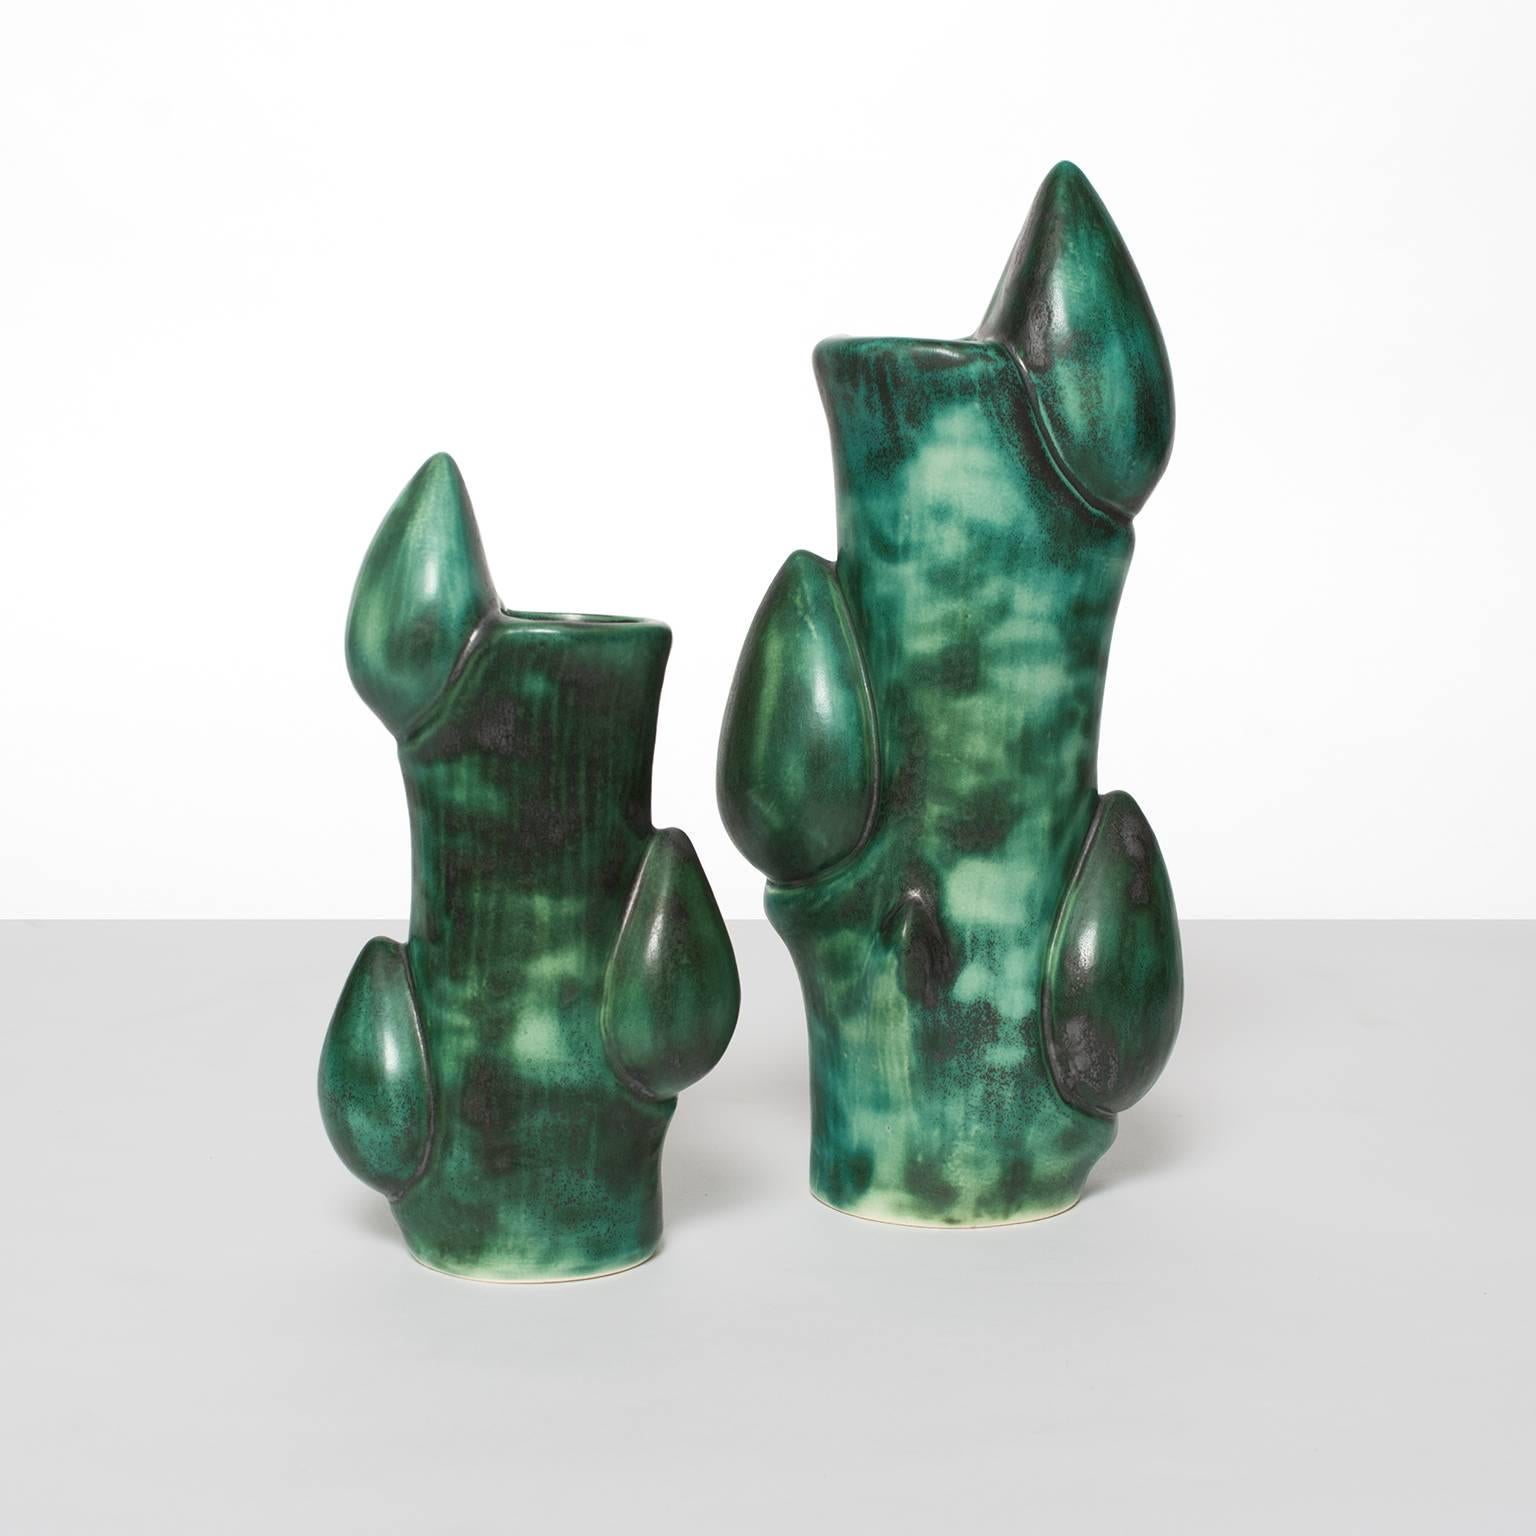 One large and one smaller Danish Mid-Century Modern ceramic vases by Knud Basse for Michael Andersen & Sons. These 